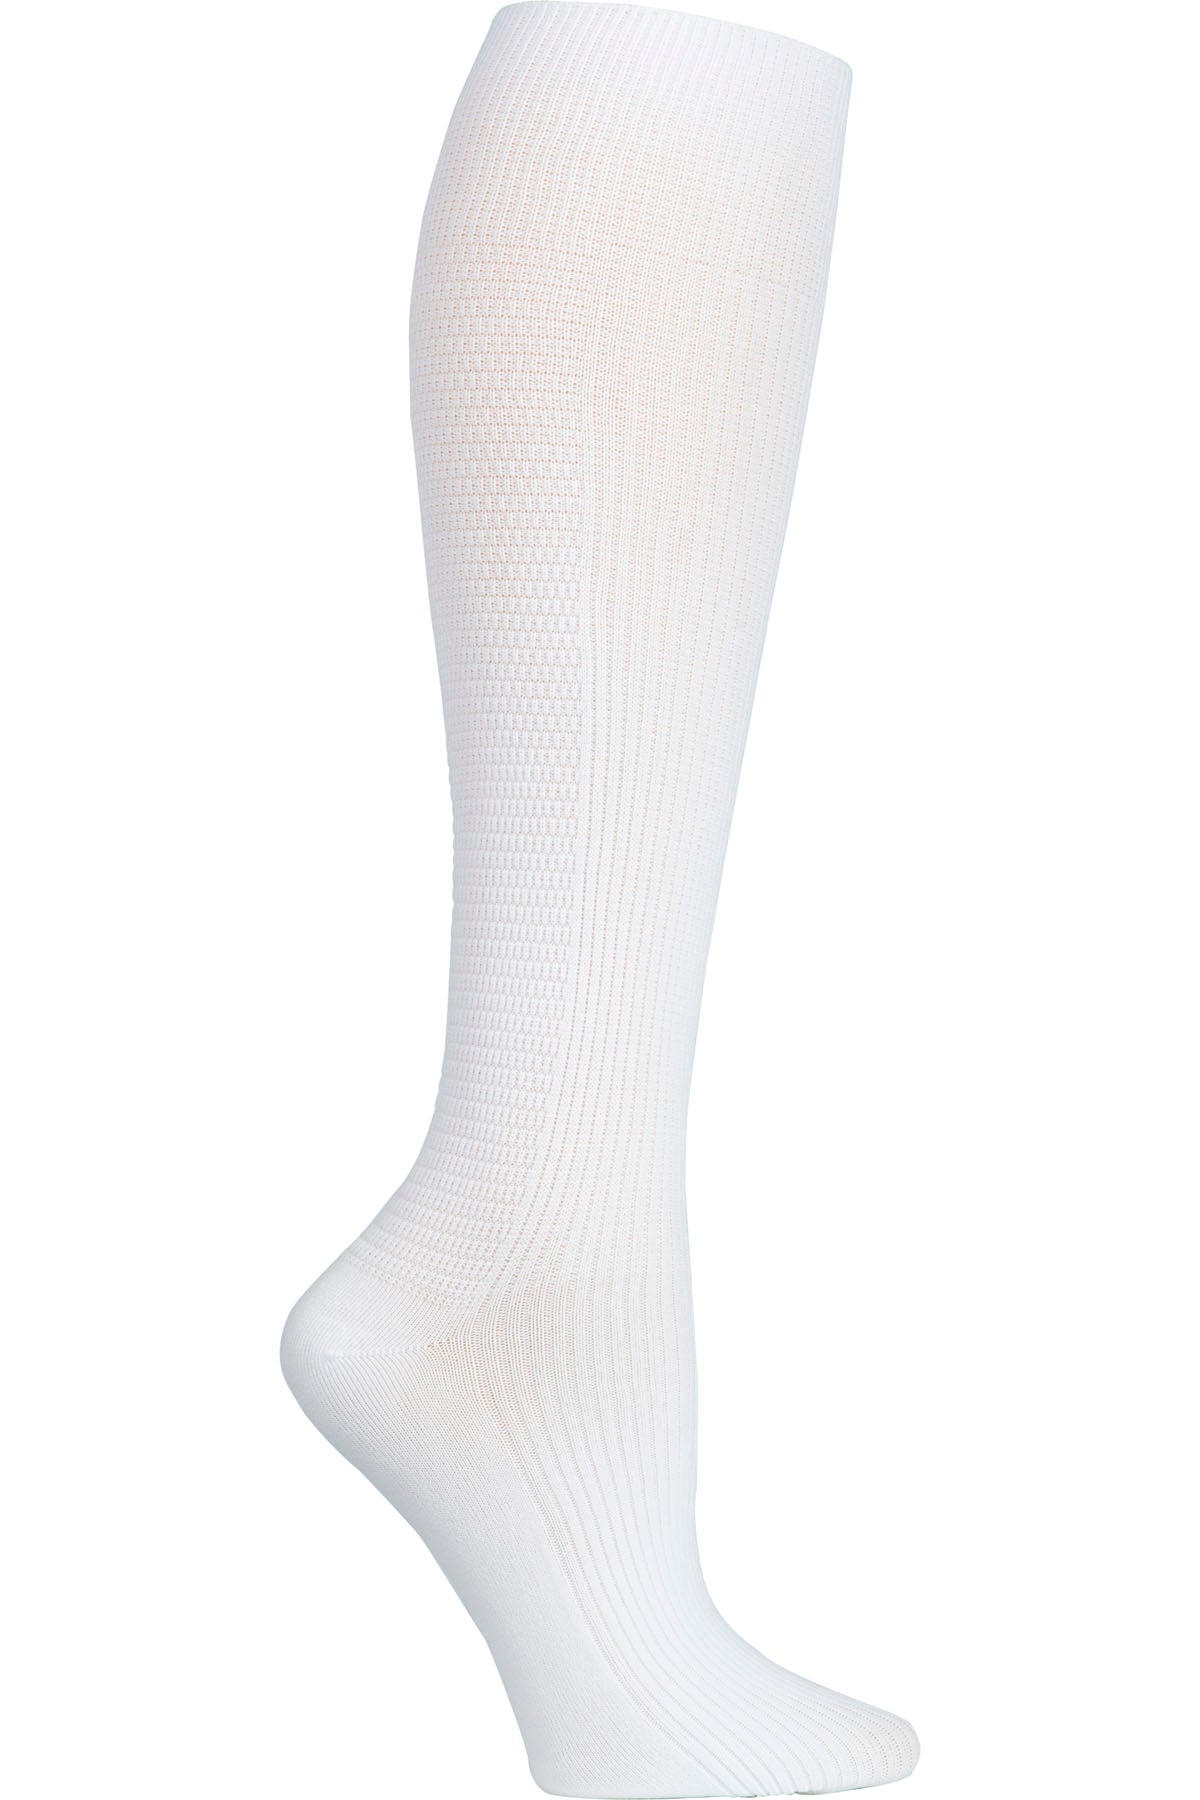 Cherokee Mild Compression Support Socks 8-12 mmHg in White at Parker's Clothing and Shoes.